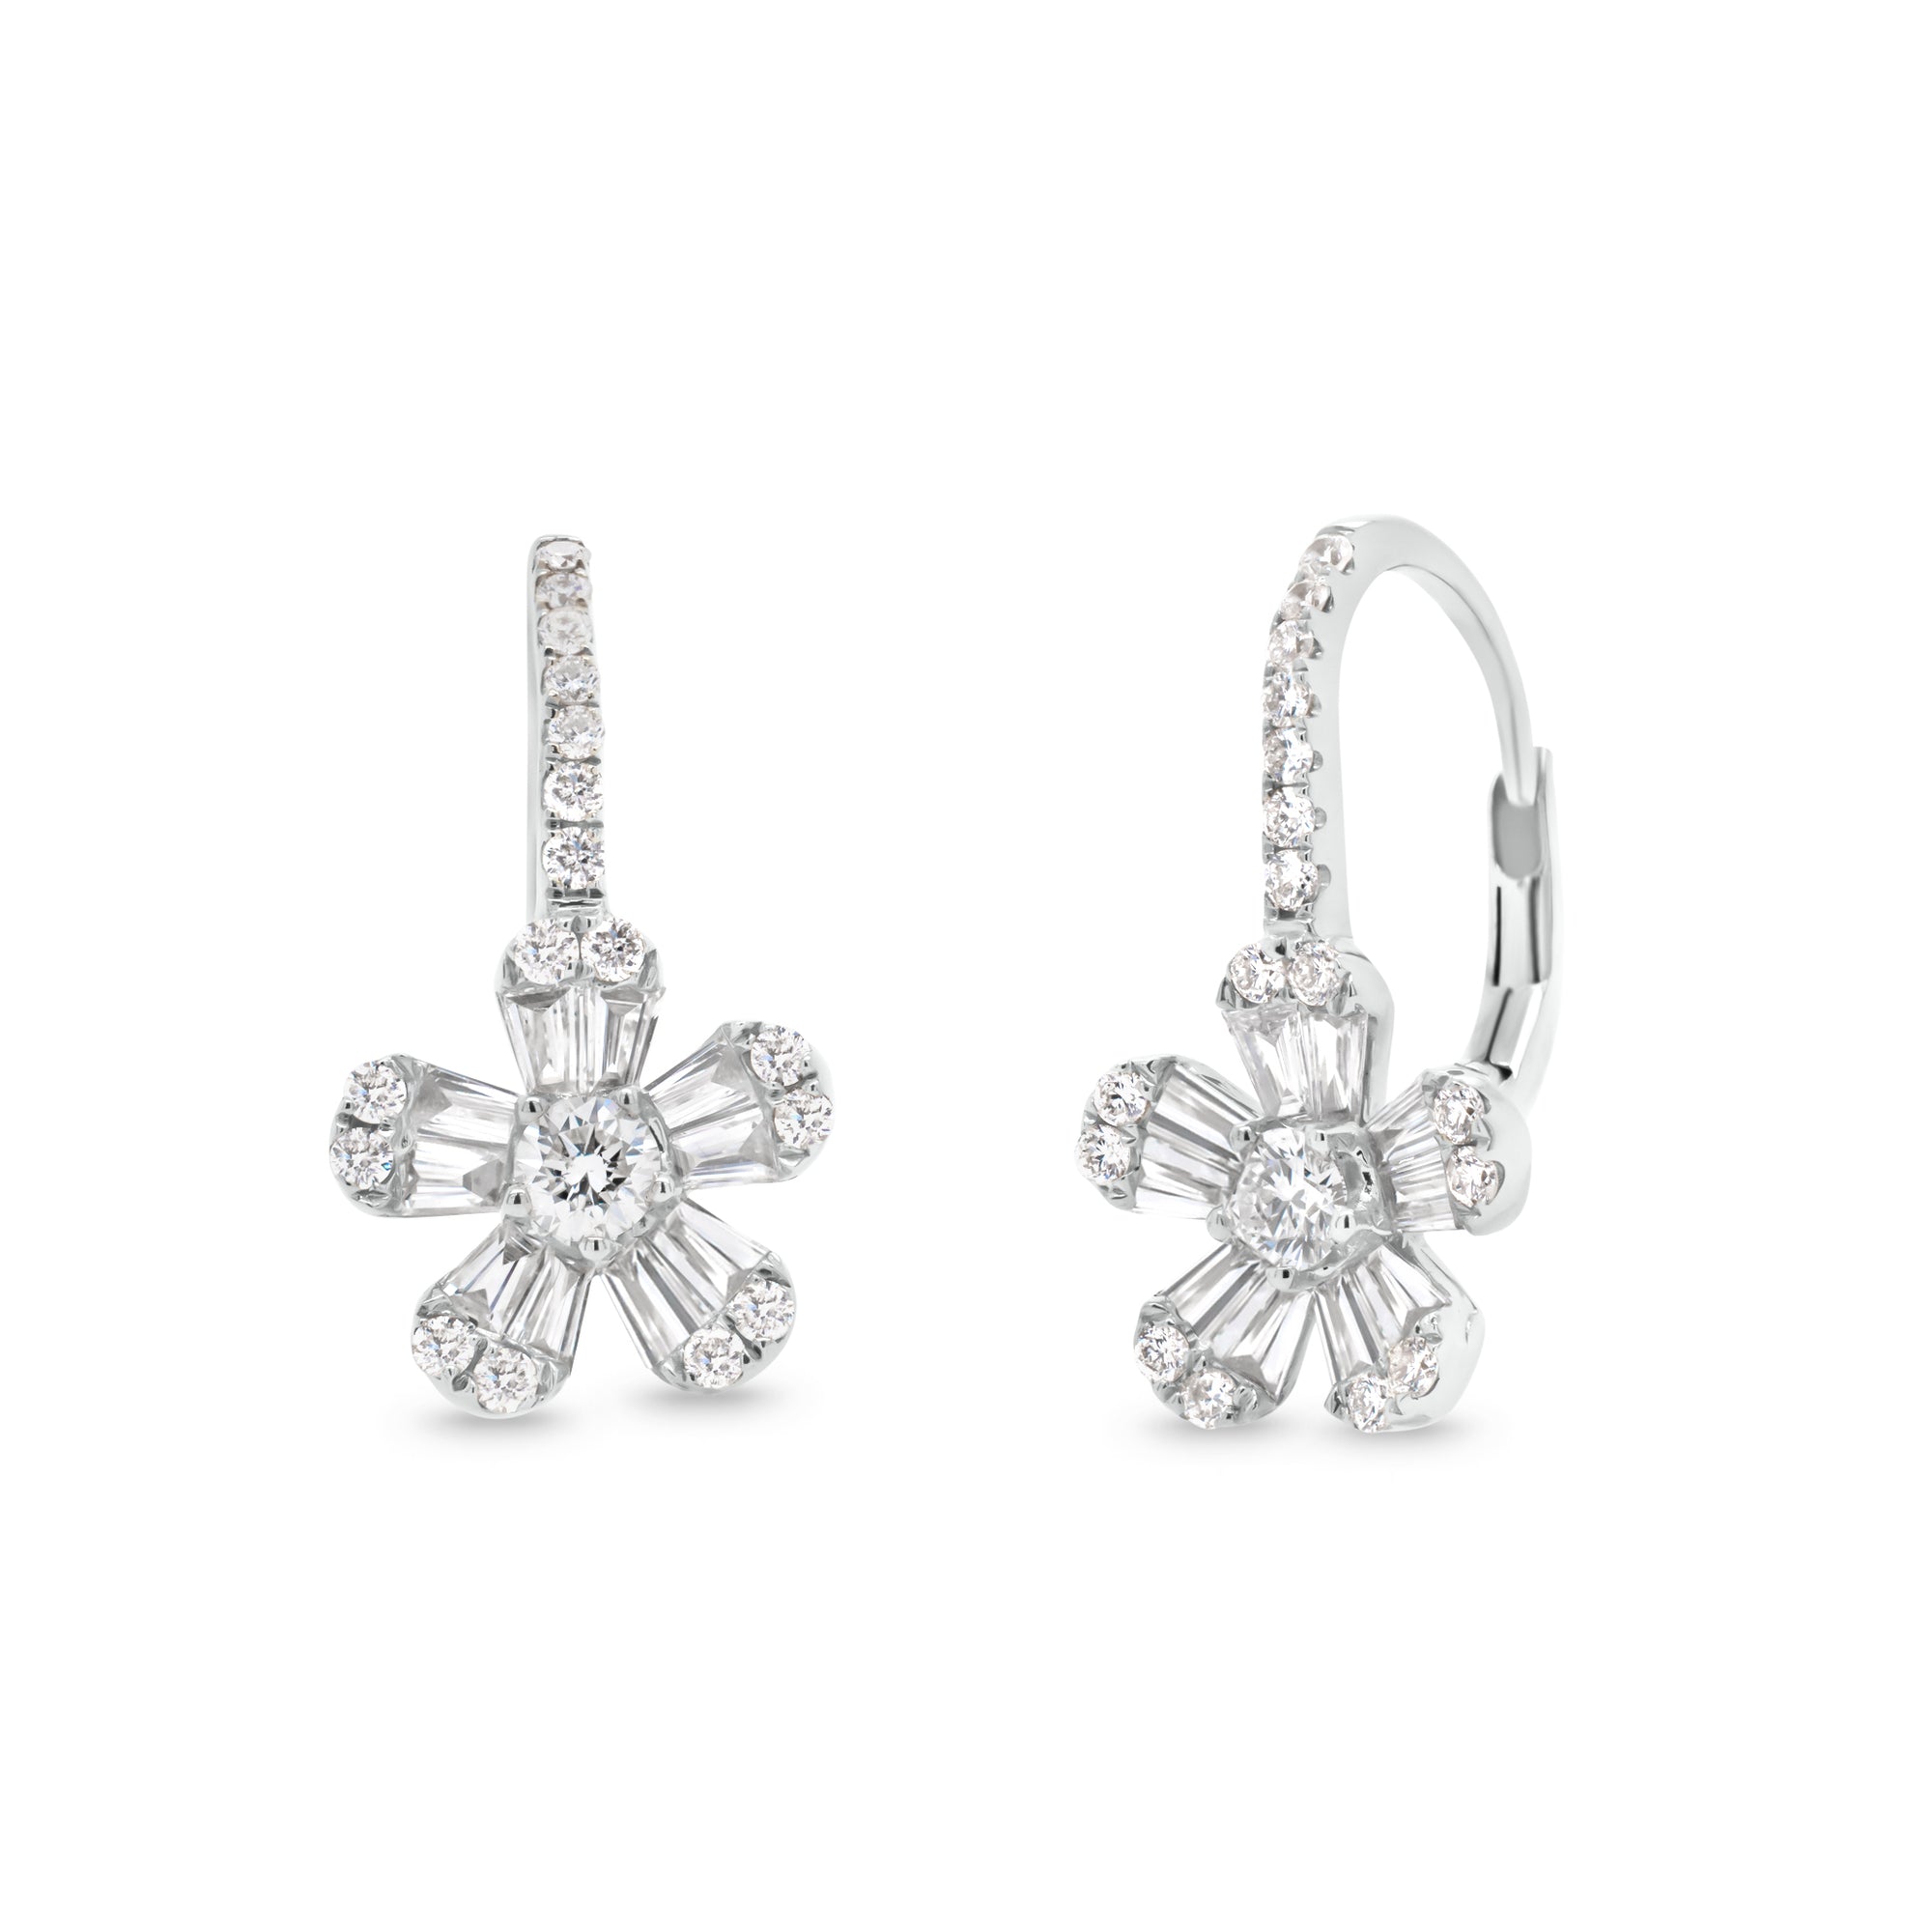 Diamond Daisy Lever-Back Earrings   -14K gold weighing 2.36 grams  -20 straight baguettes totaling 0.45 carats  -36 round diamonds totaling 0.43 carats